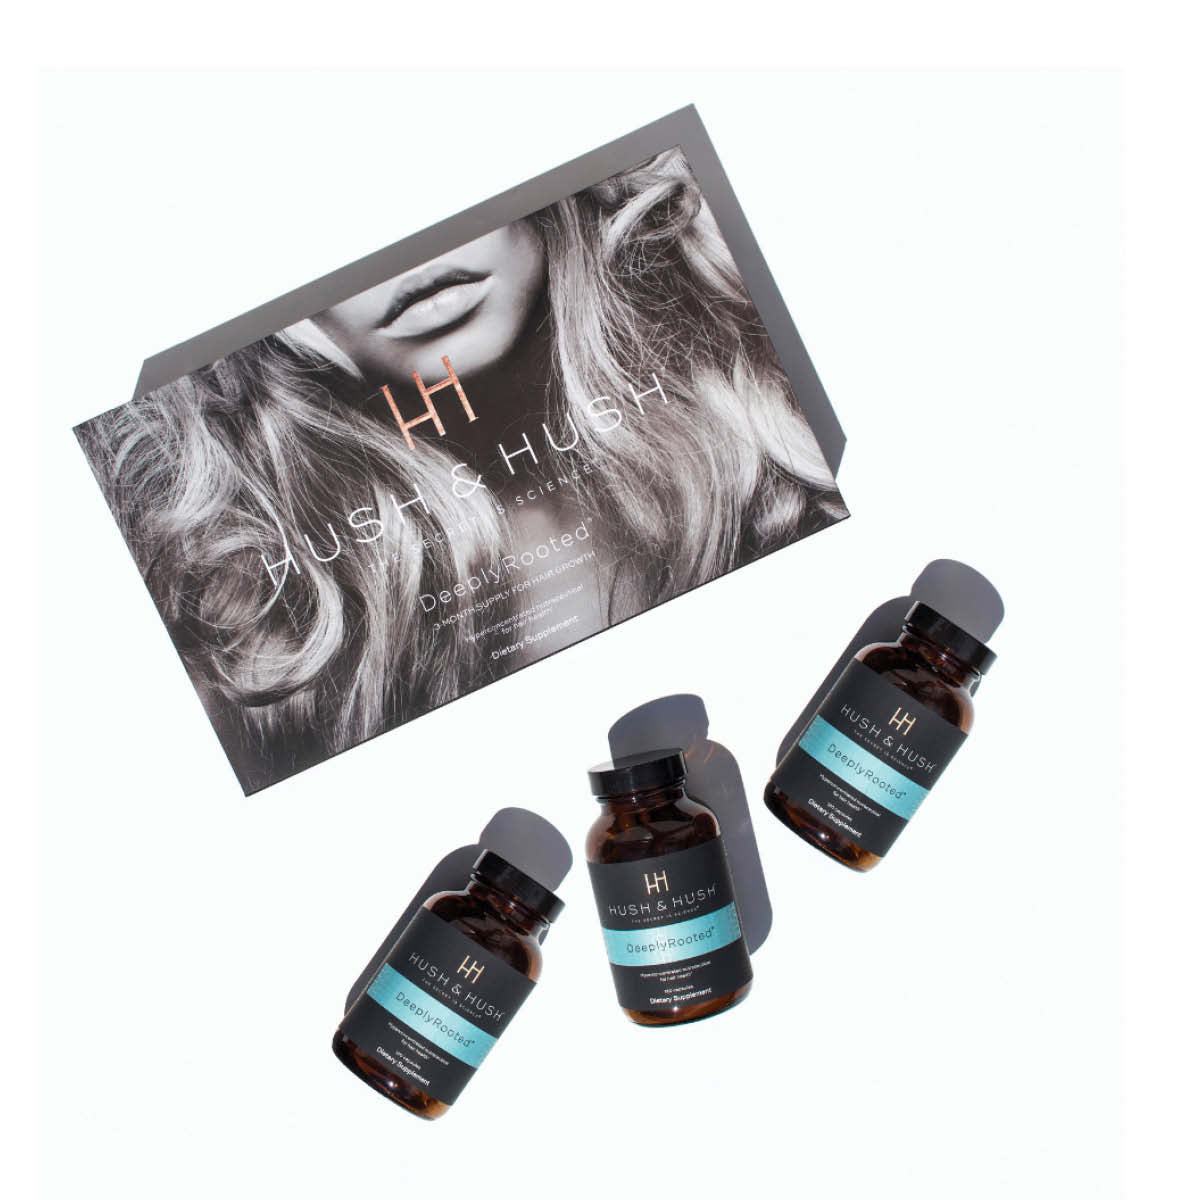 Hush and Hush Deeply Rooted 3-Month Supply for Hair Growth